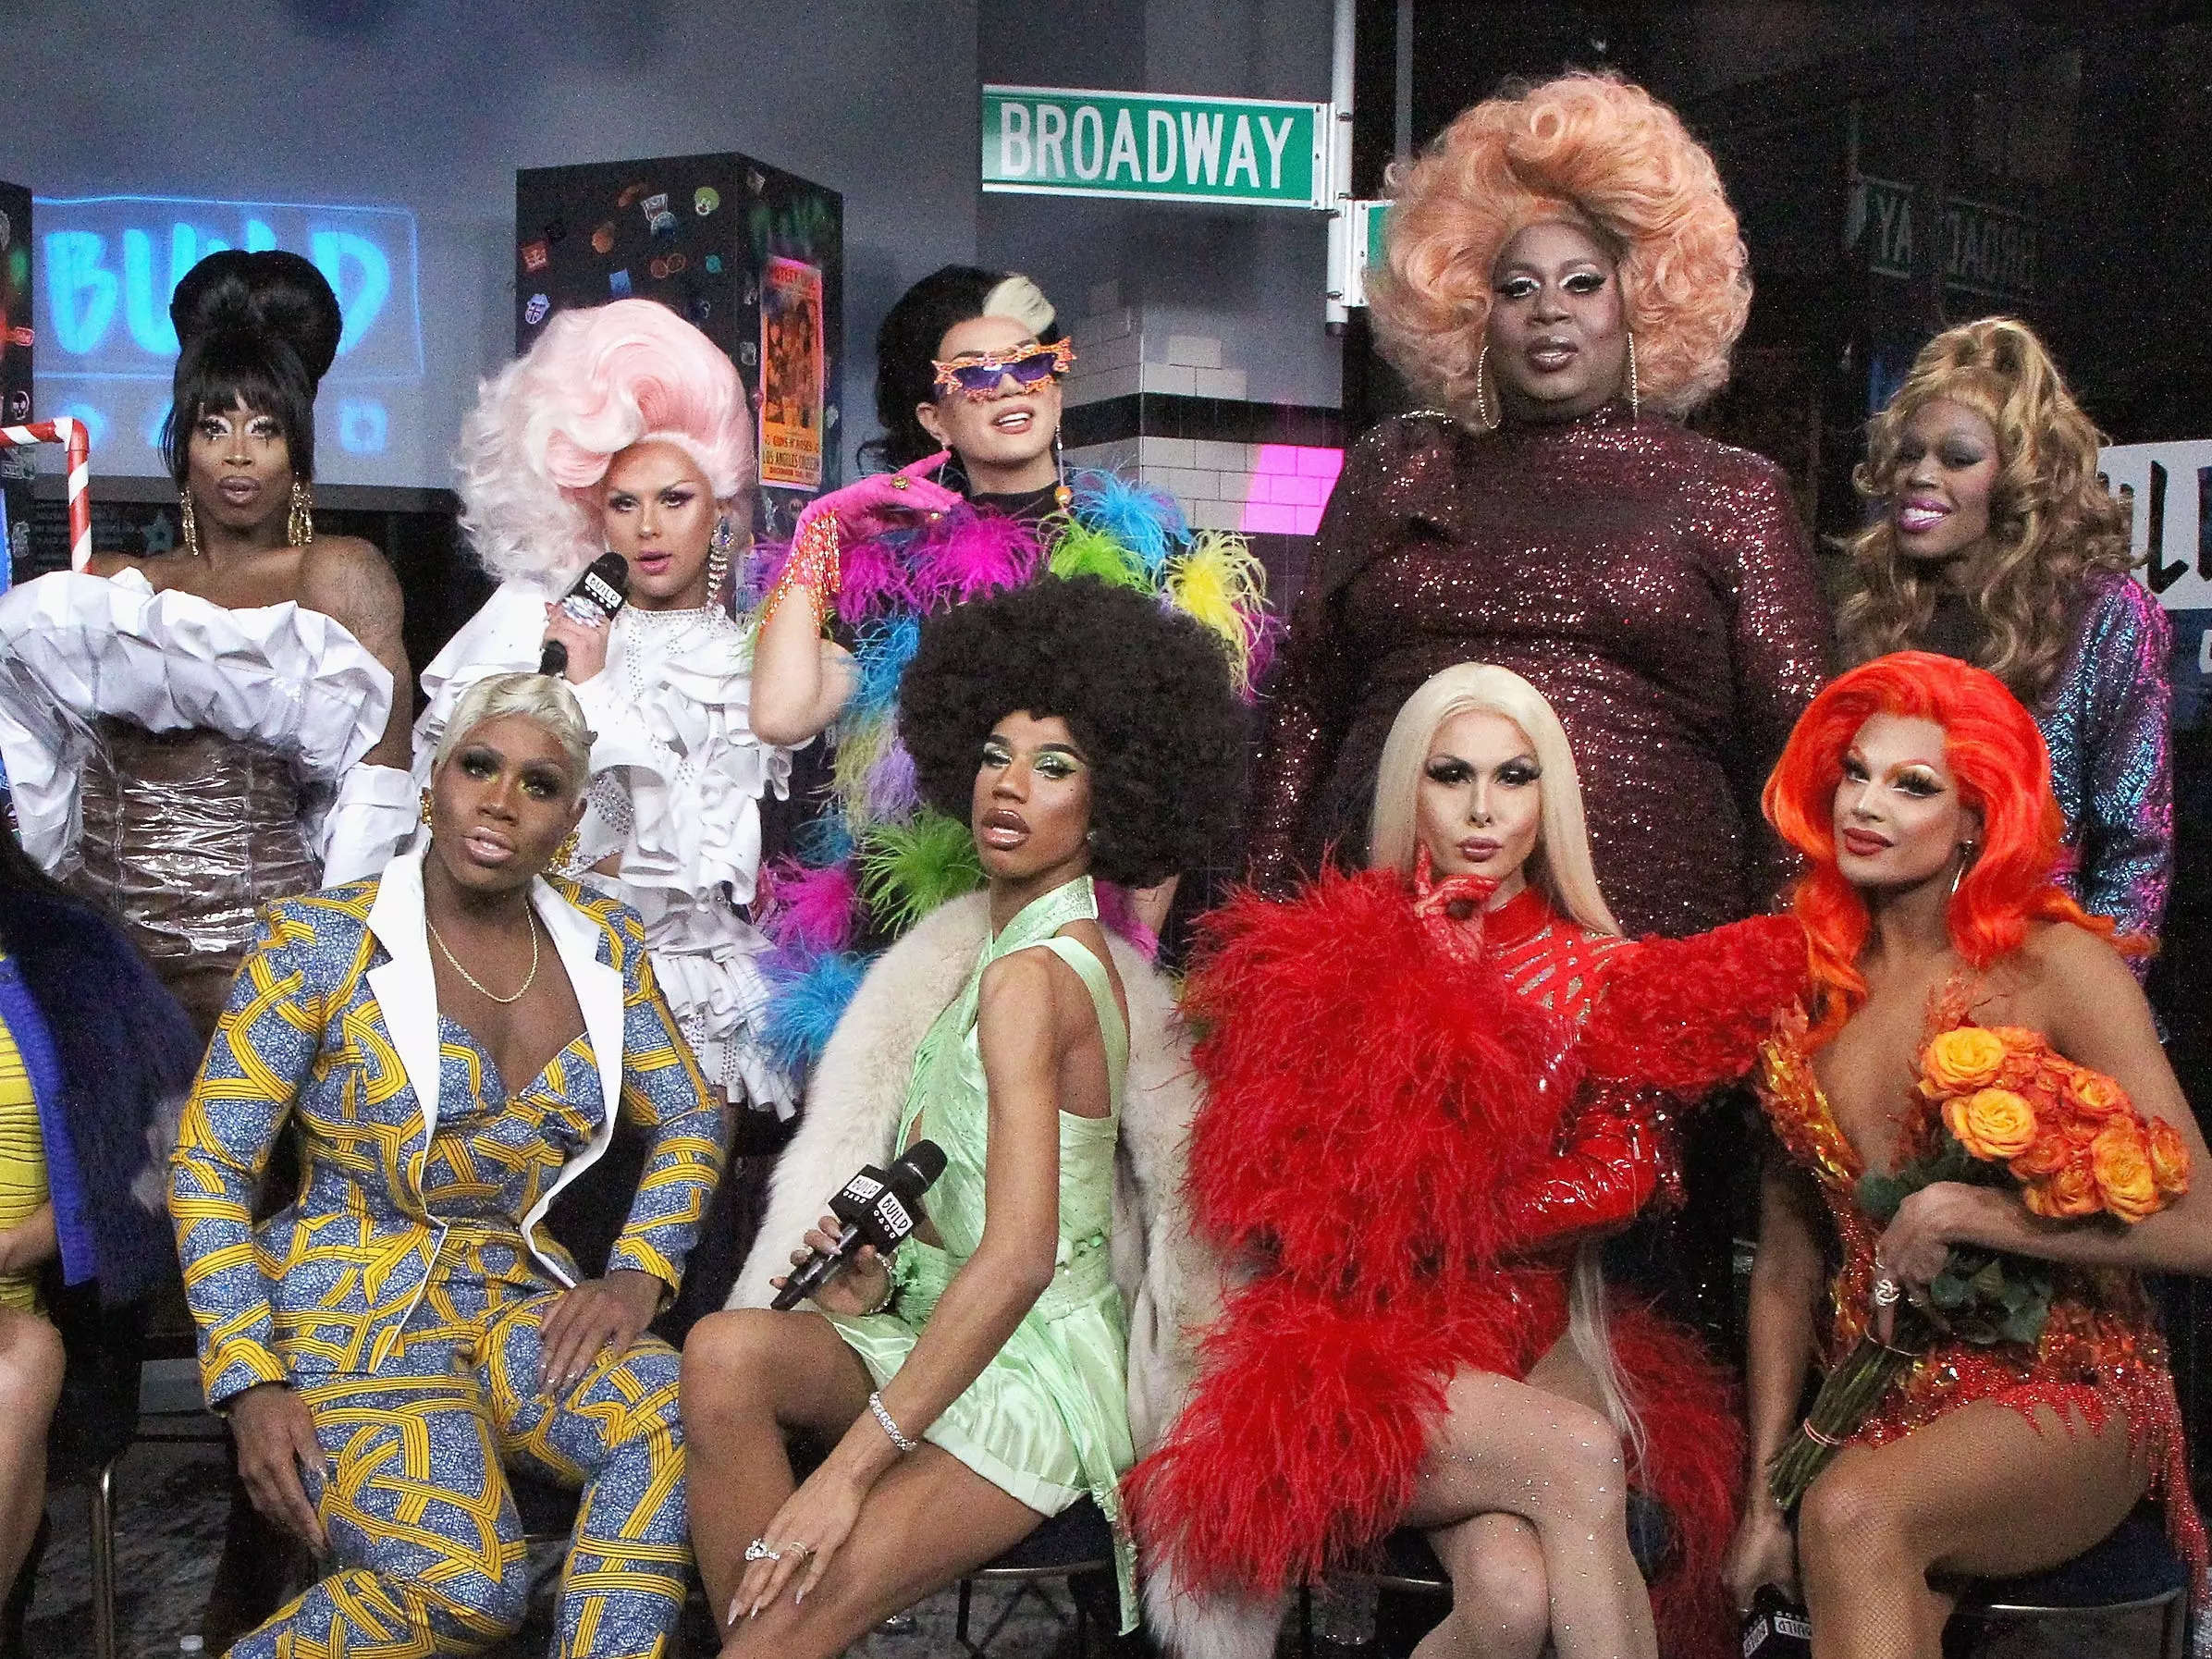 Some of the drag queens from "Drag Race" have done more than othe...